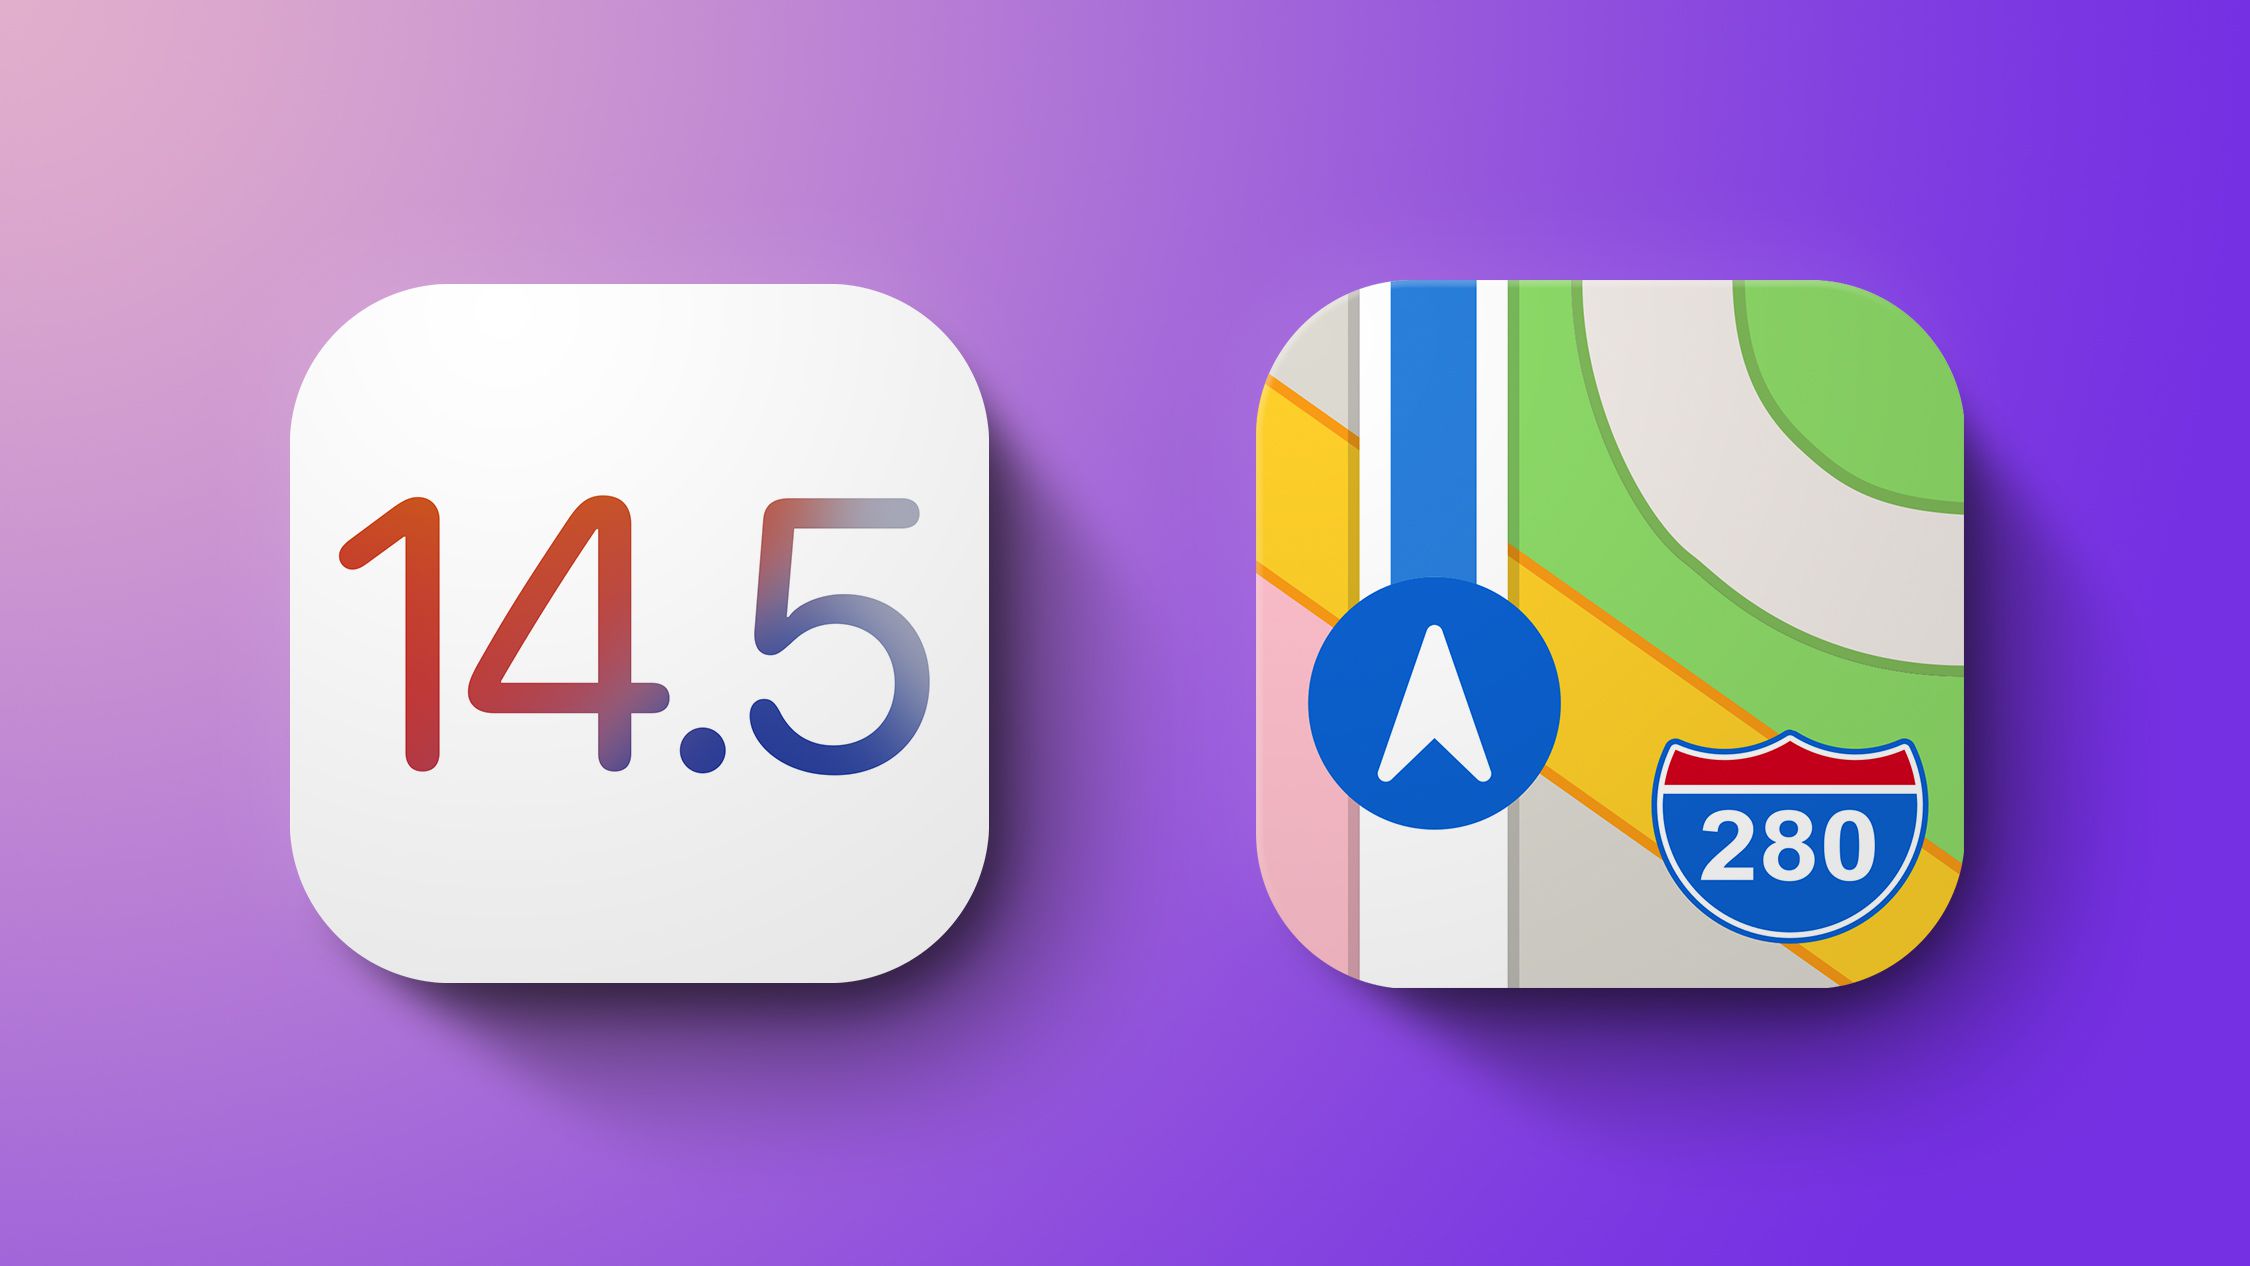 Apple Maps adds similar Waze features in iOS 14.5 for crowdsourcing crashes, speed traps and dangers